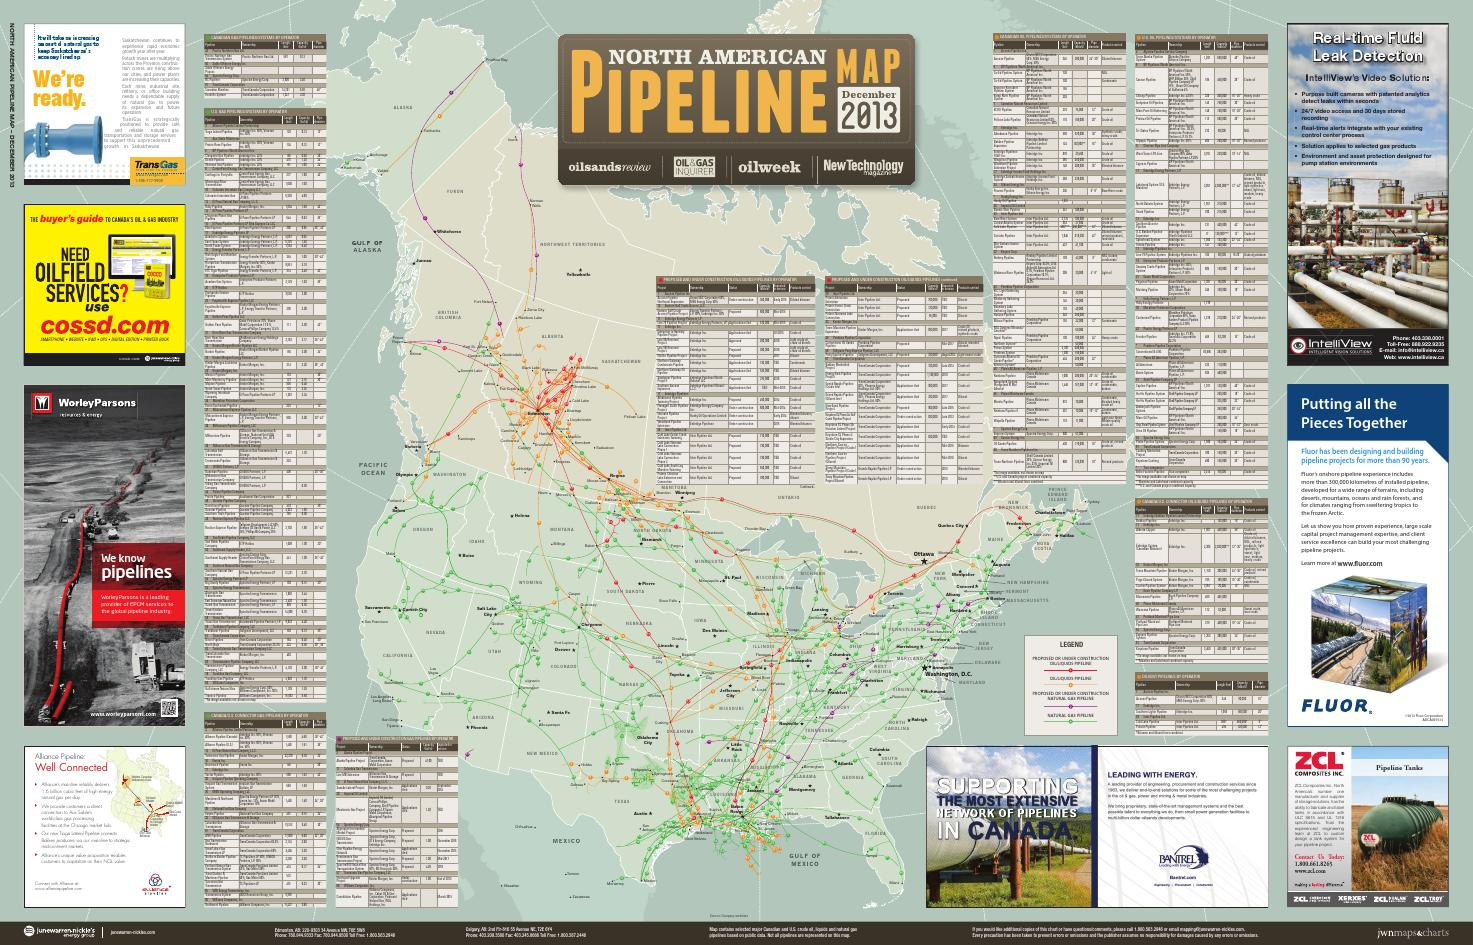 North American Pipeline Map December 2013Jwn | Trusted Energy - Oneok Pipeline Map Texas